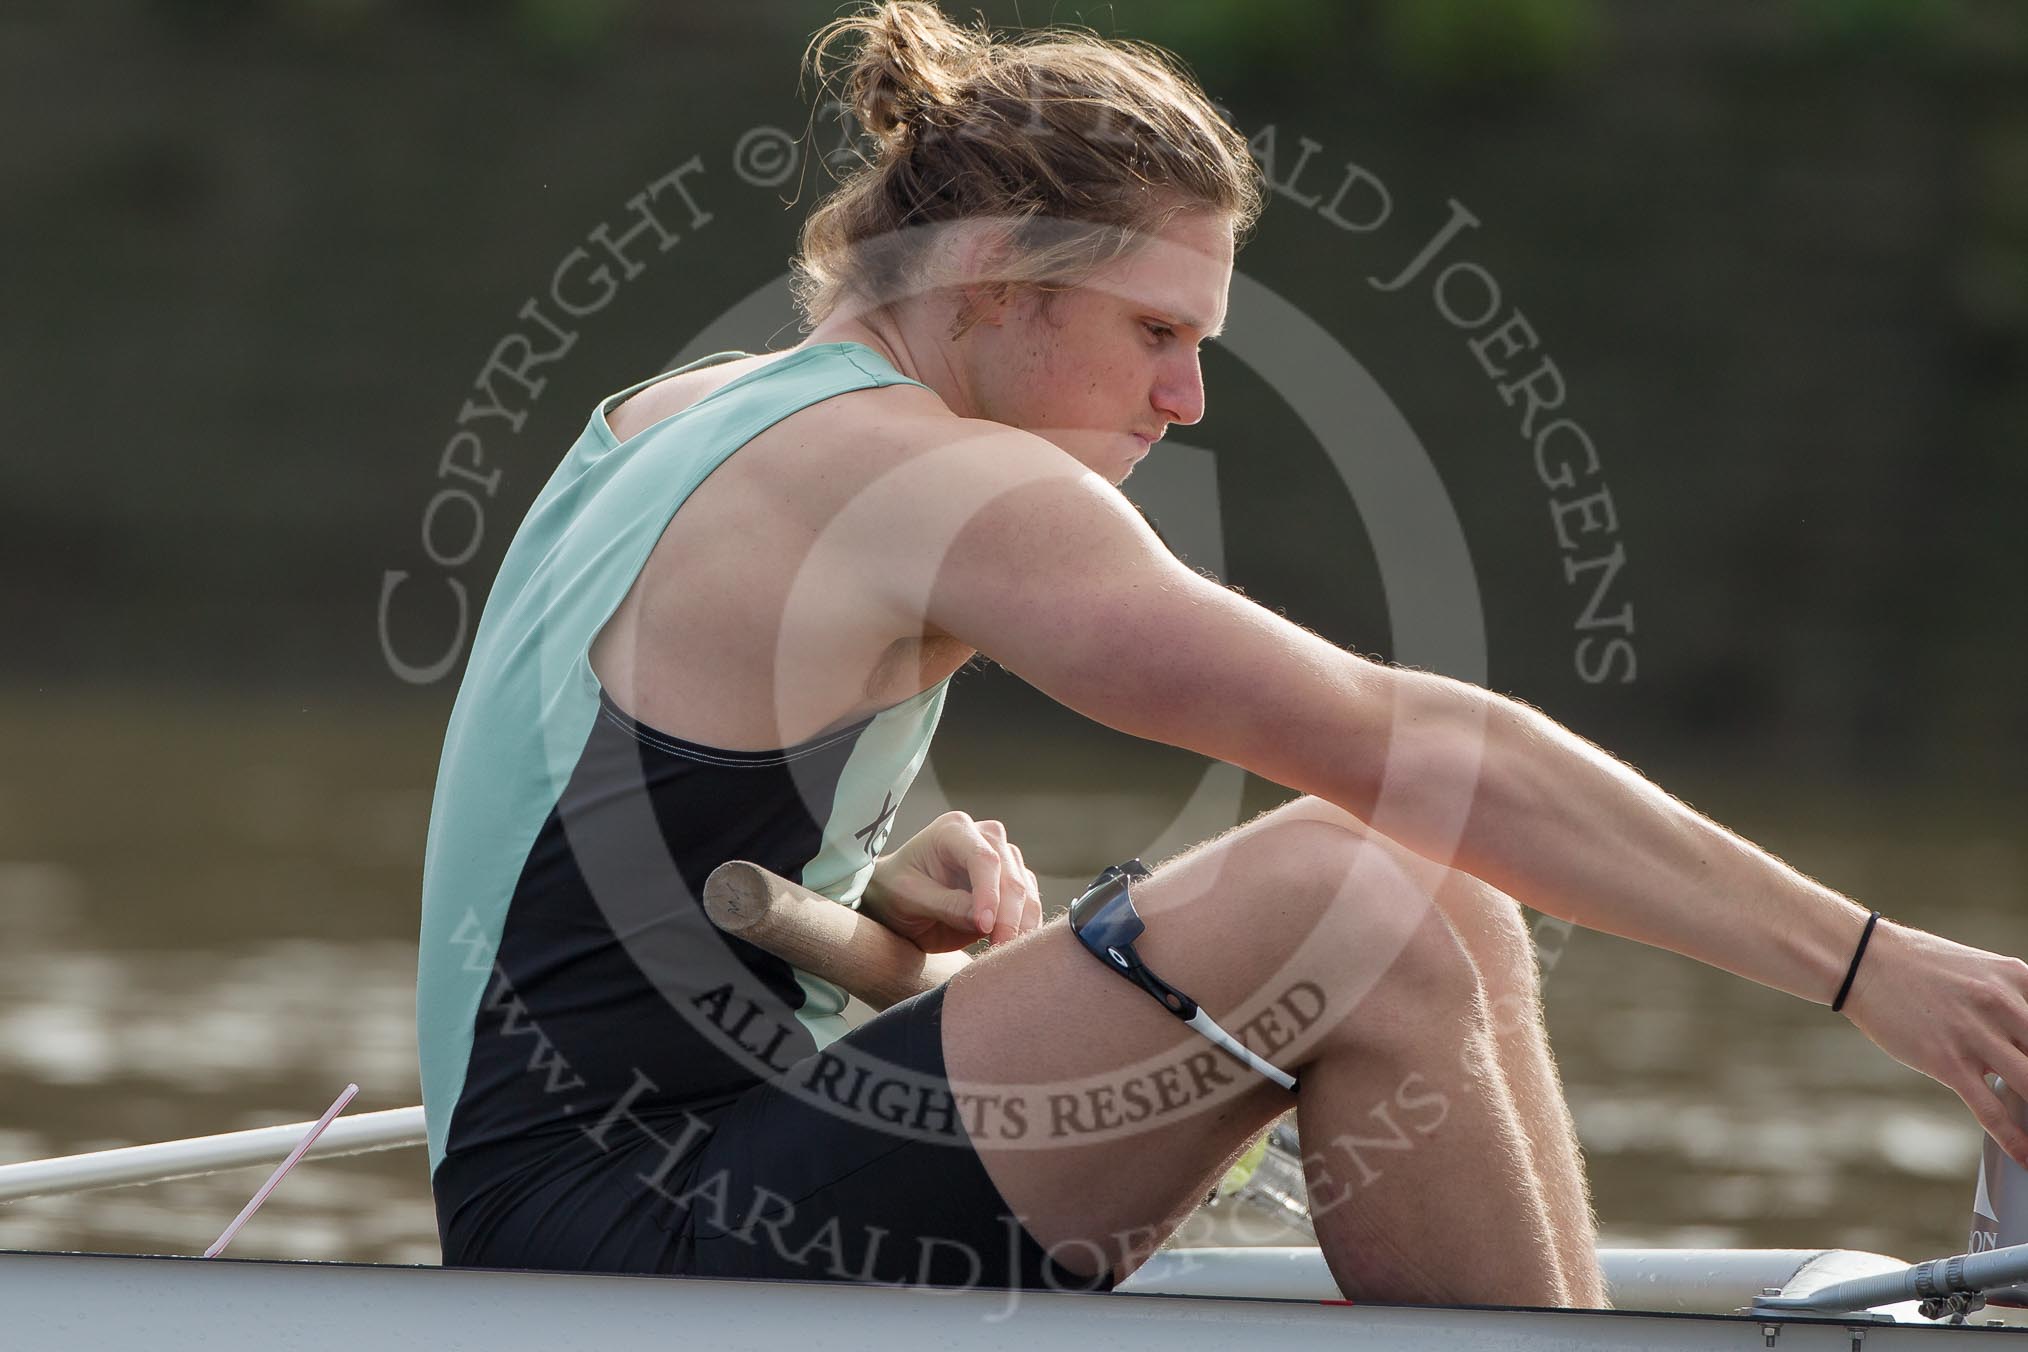 The Boat Race season 2012 - fixture CUBC vs Leander: Close-up of CUBC 3 seat Michael Thorp..
River Thames between Putney and Molesey,
London,
Greater London,
United Kingdom,
on 10 March 2012 at 14:06, image #71